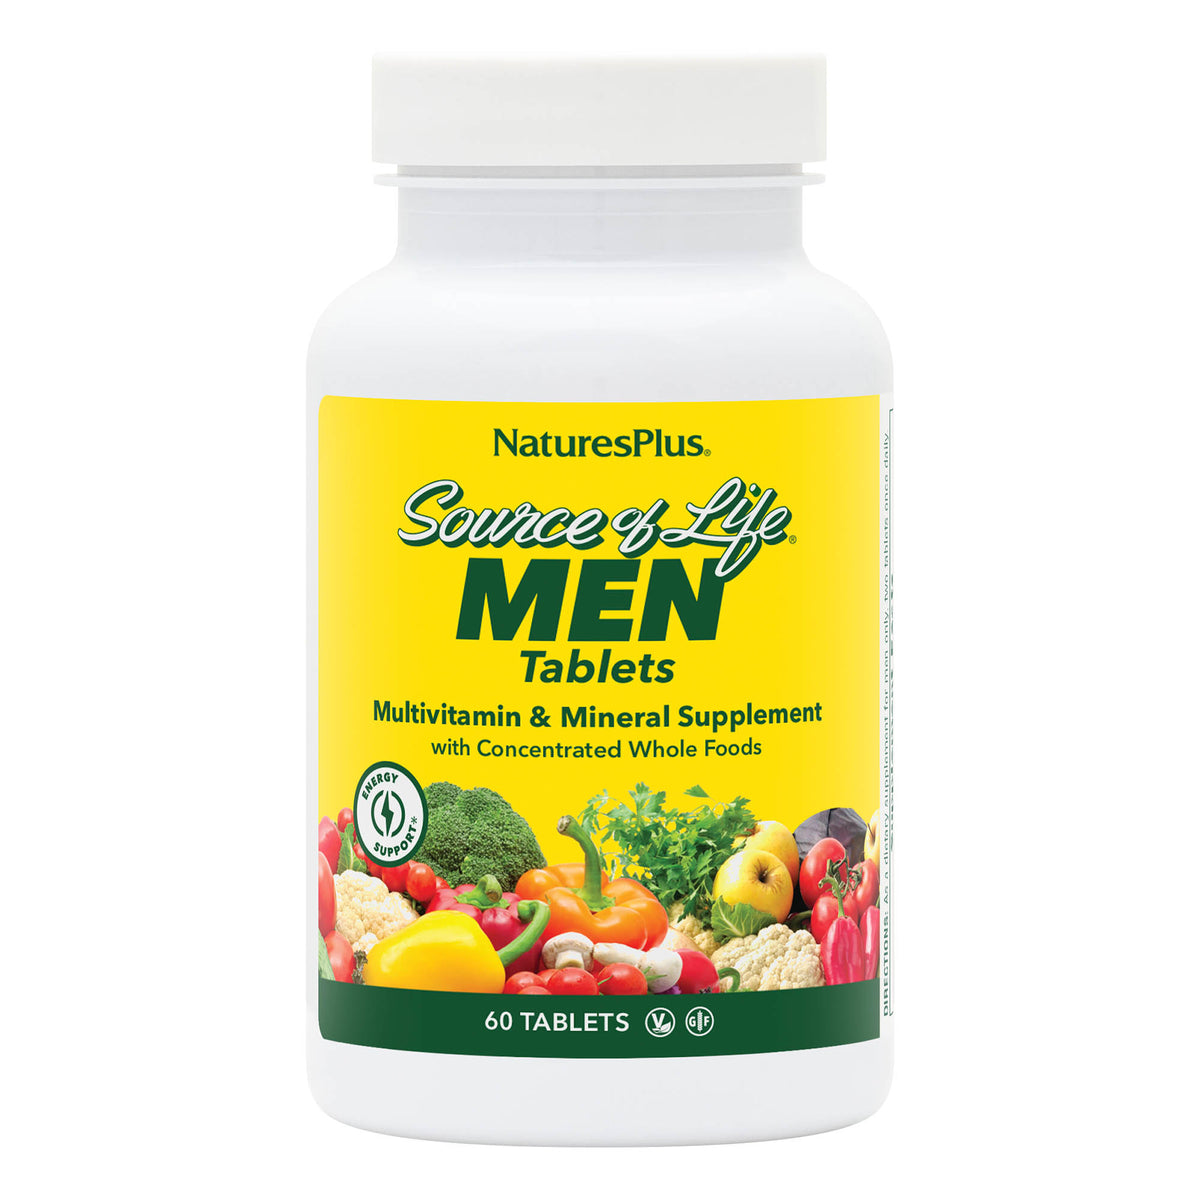 product image of Source of Life® Men Multivitamin Tablets containing 60 Count